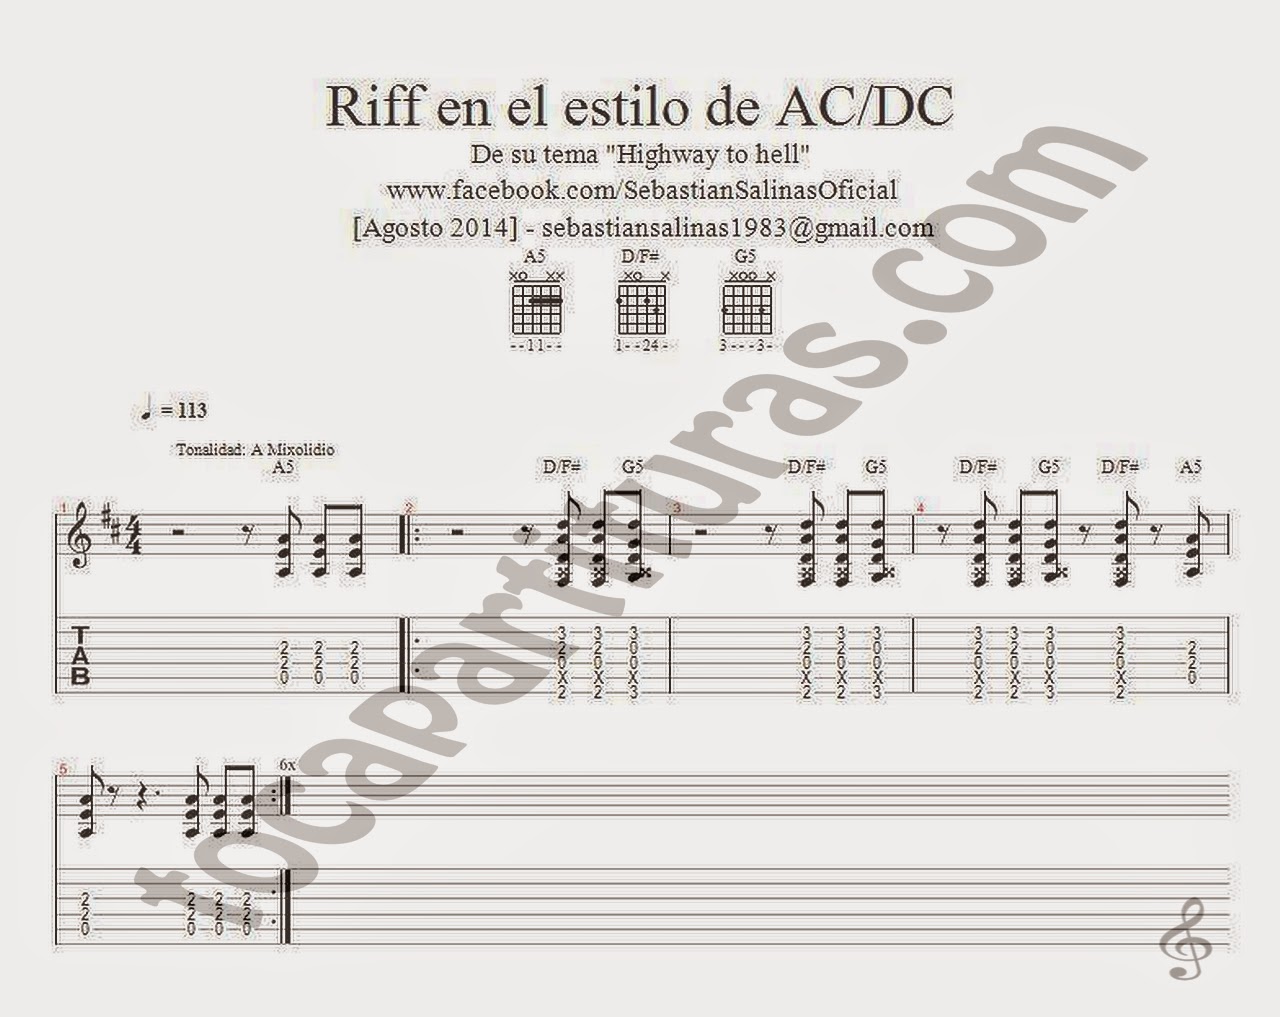 Tablatura con Acordes para Guitarra del Riff estilo AC/DC Highway to hell Sheet Music Tablature for easy guitar with chords Lead sheet